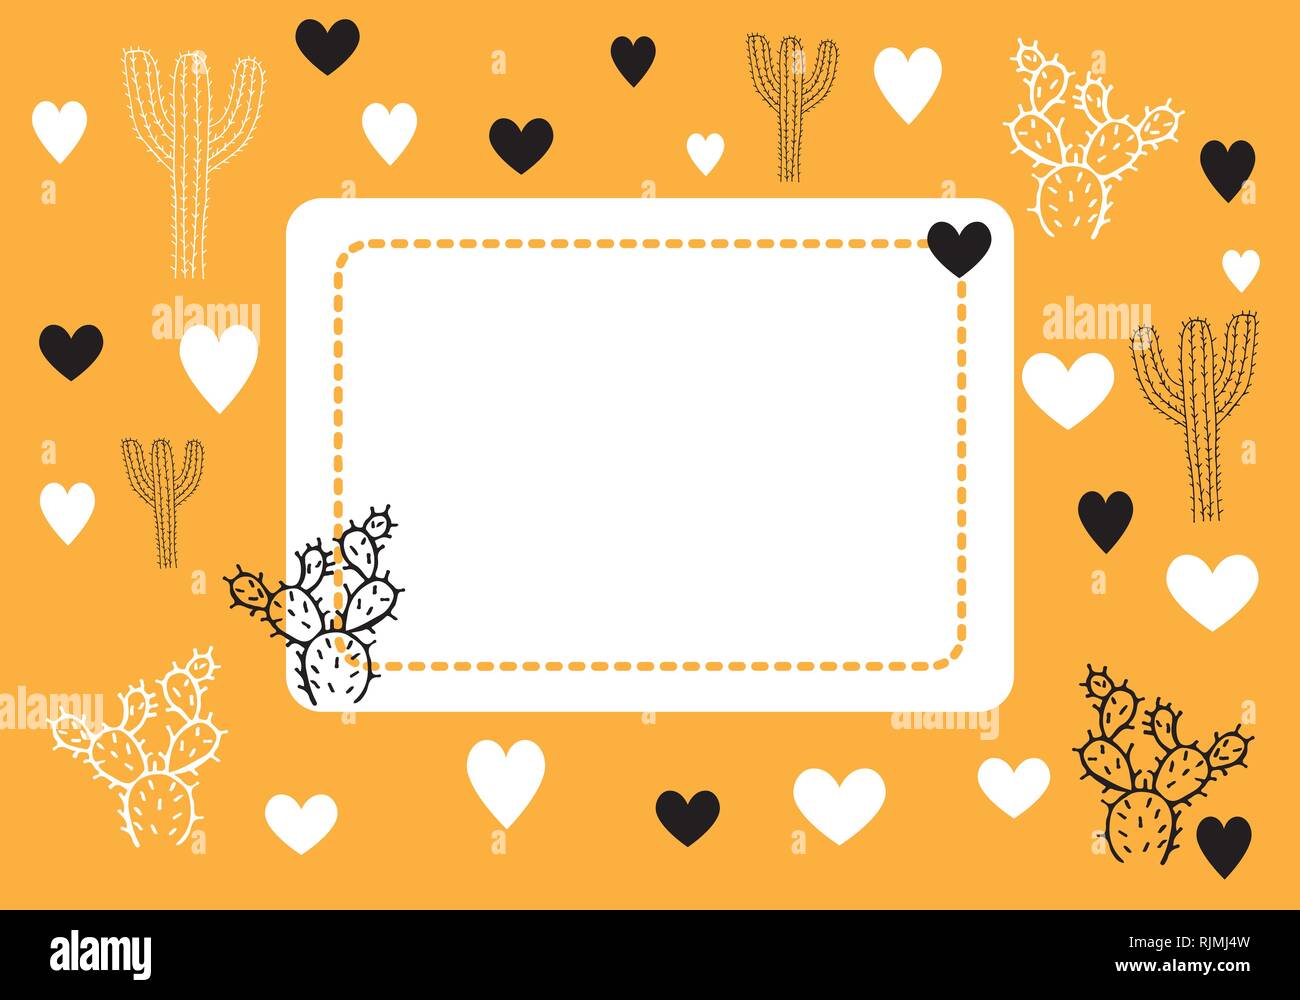 Cactus and hearts vector card template in orange, black and white color palette Stock Vector